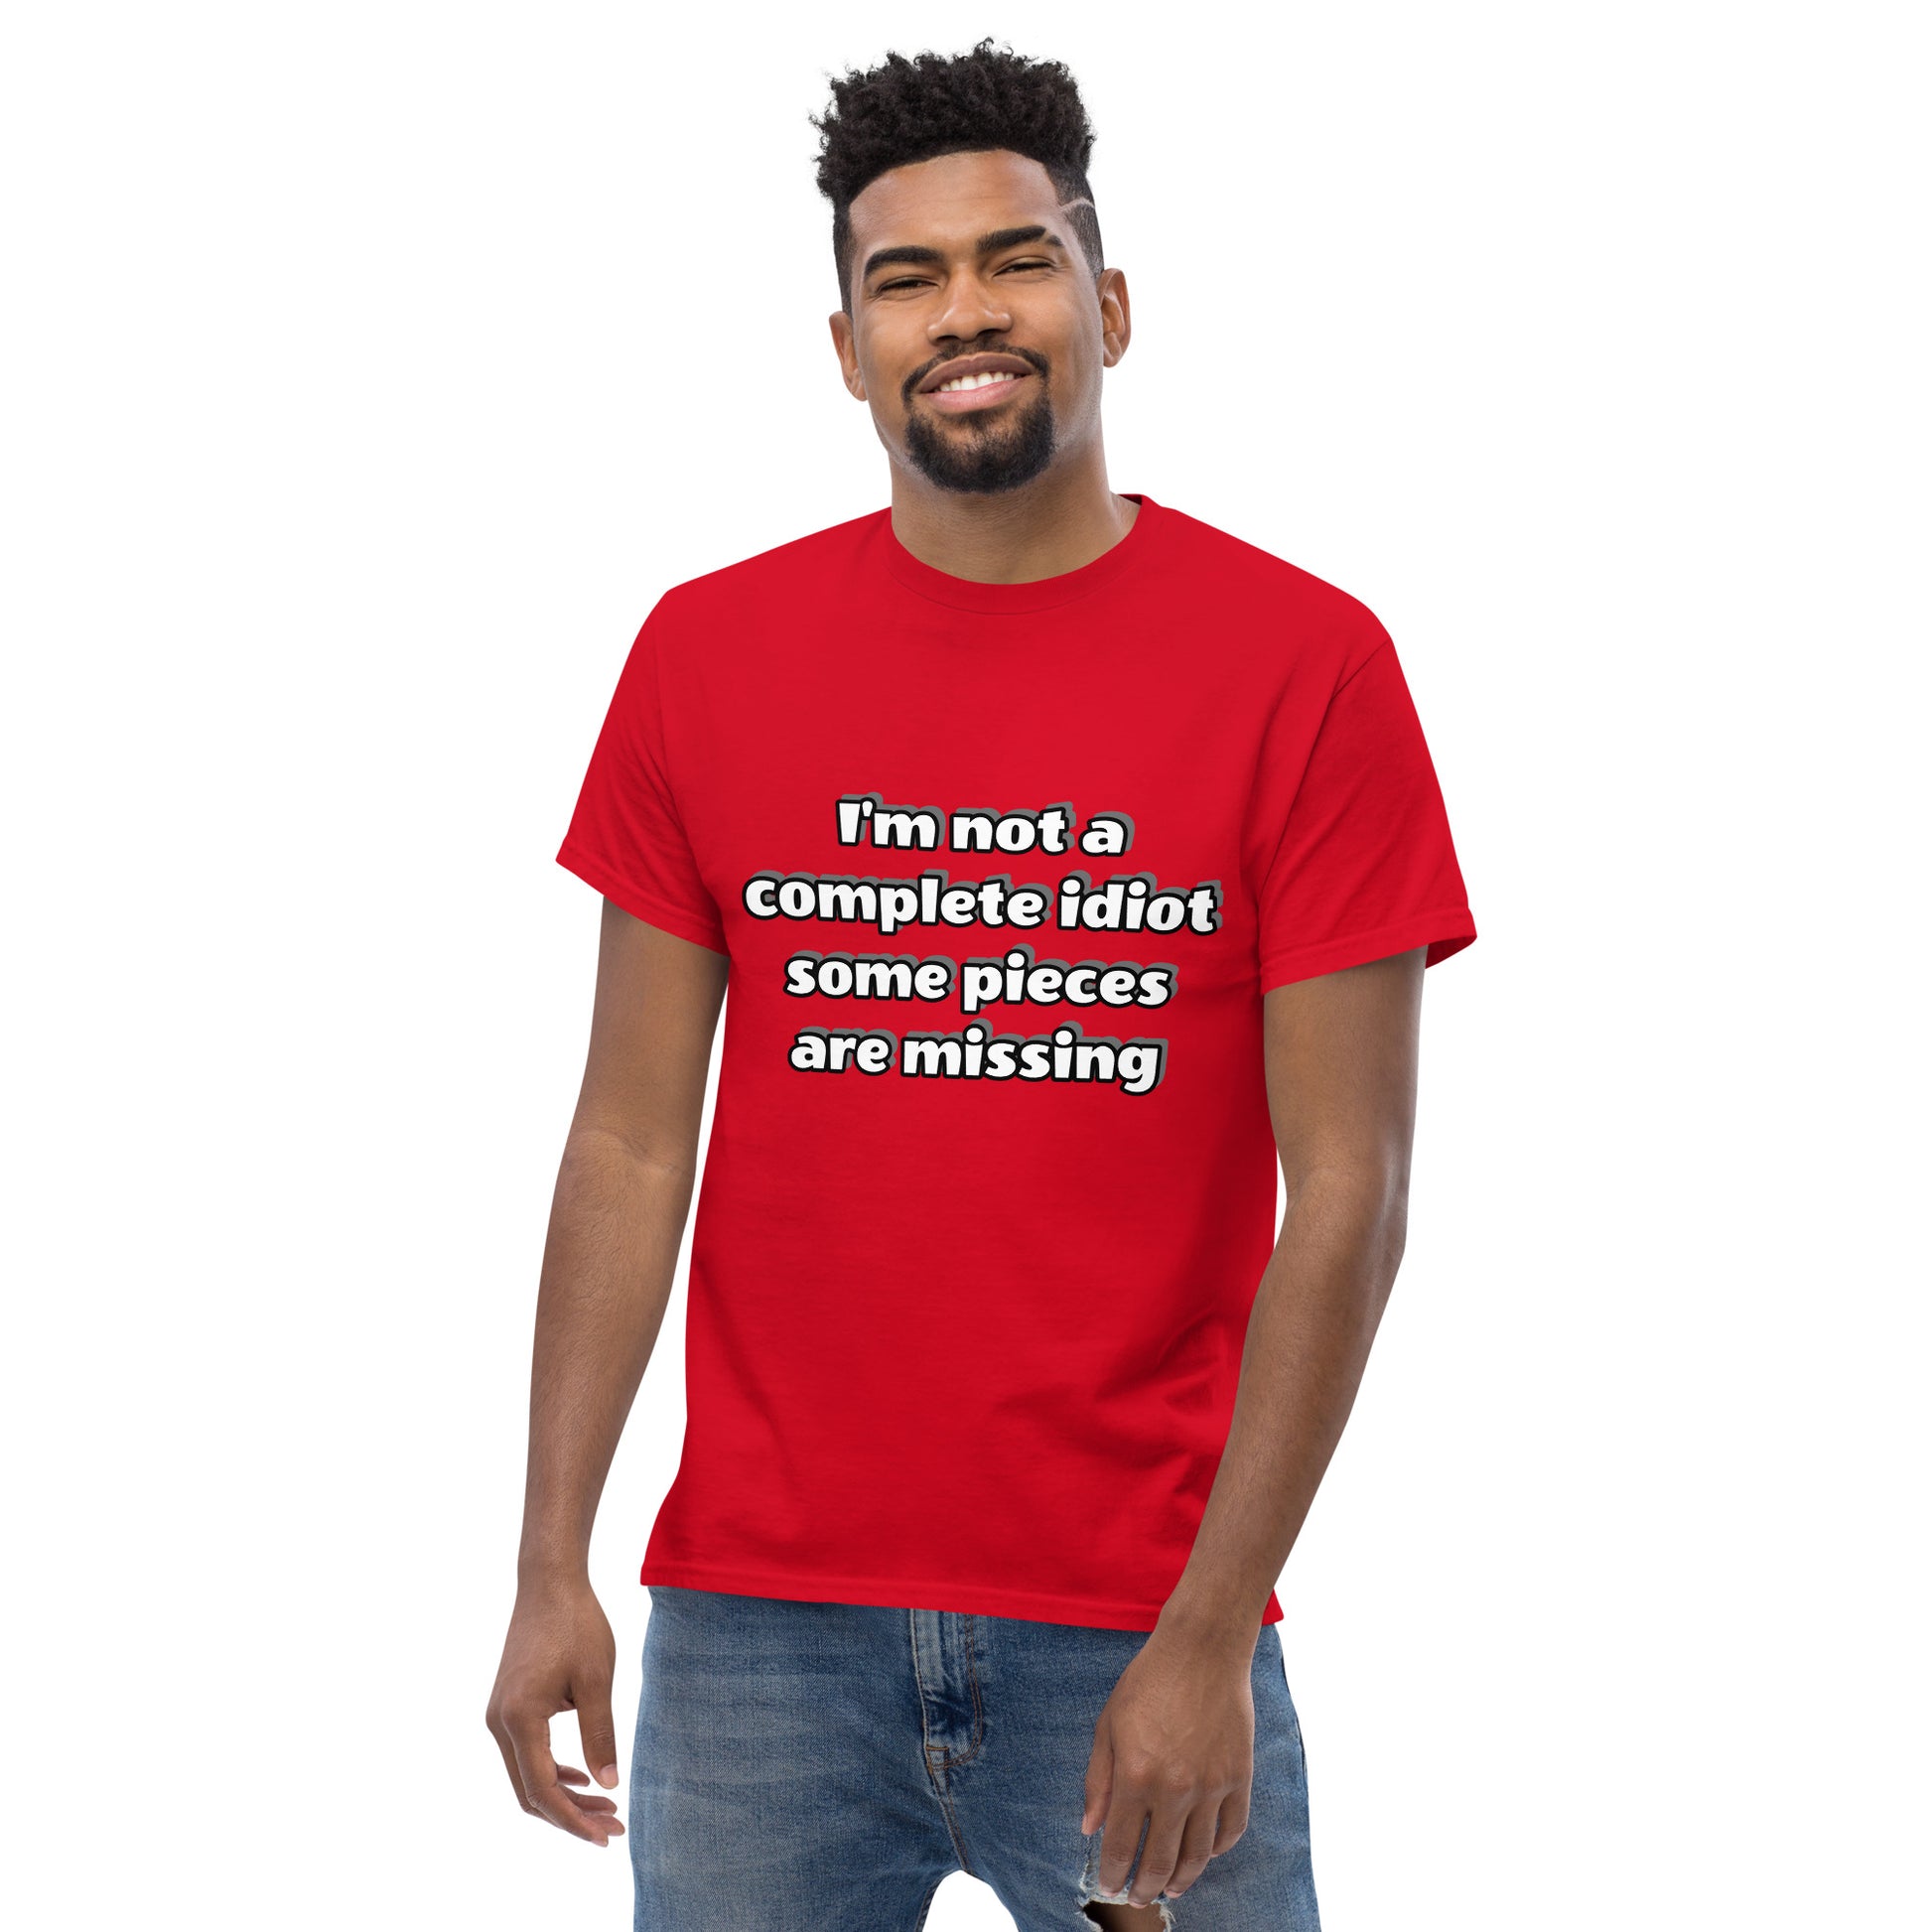 Men with red t-shirt with text “I’m not a complete idiot, some pieces are missing”